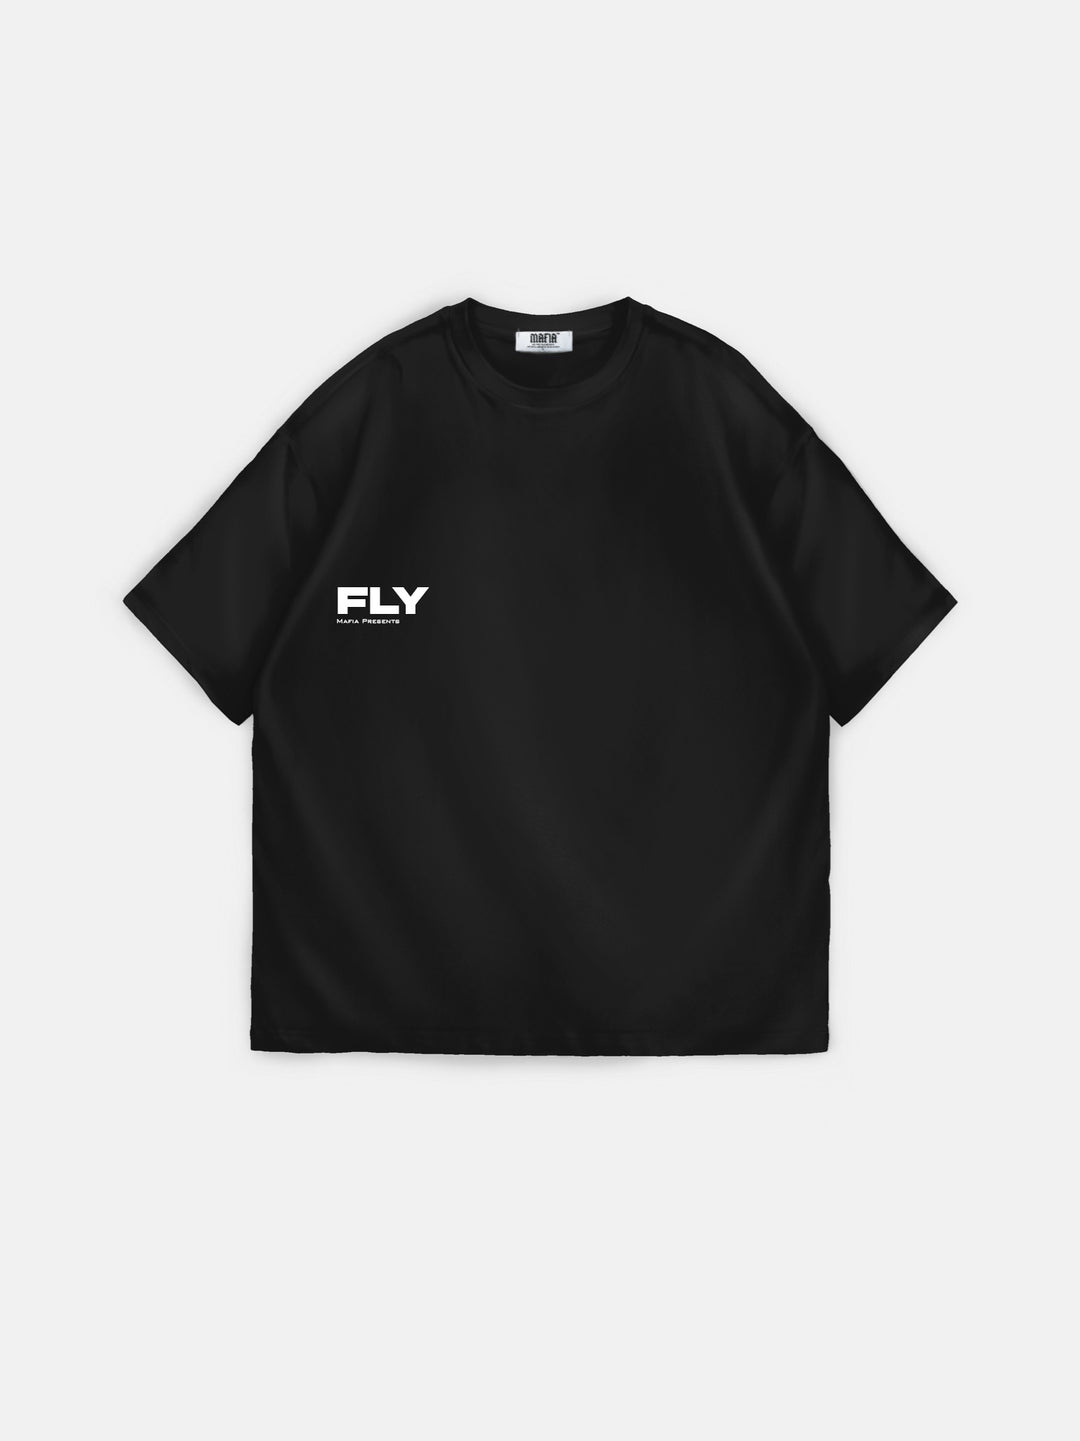 Oversize 'Fly' T-shirt - Black and White